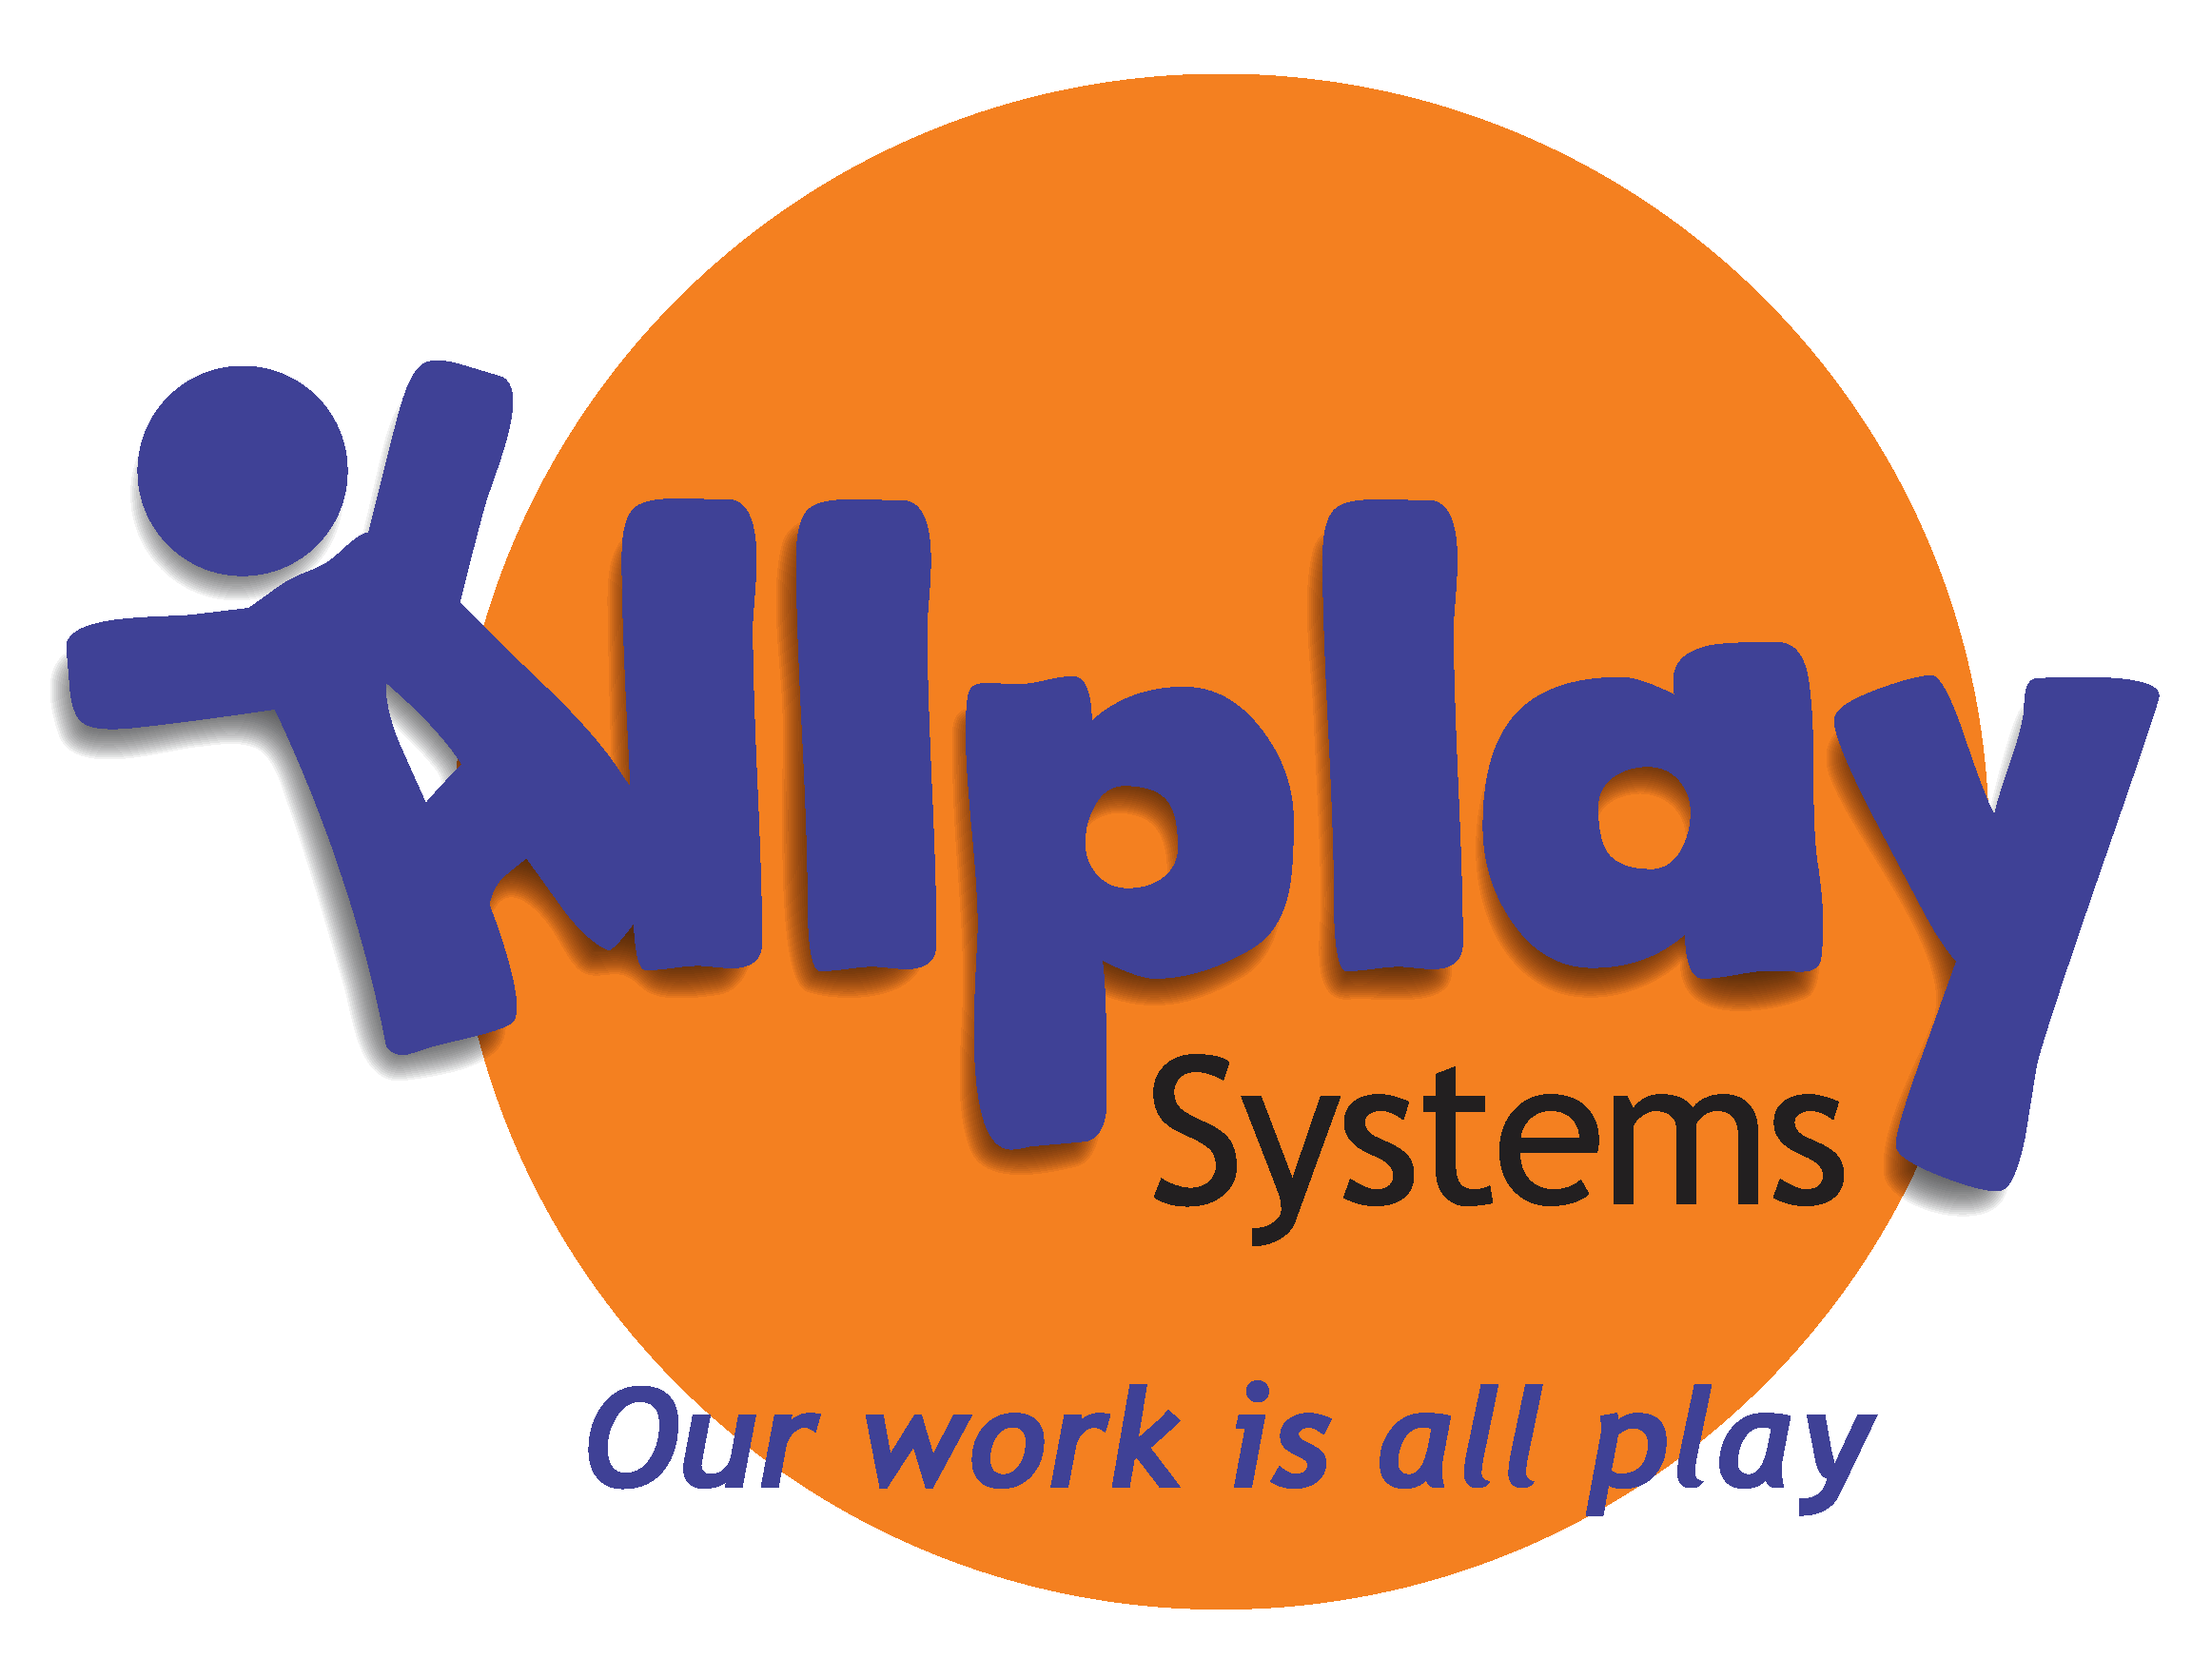 All Play Systems